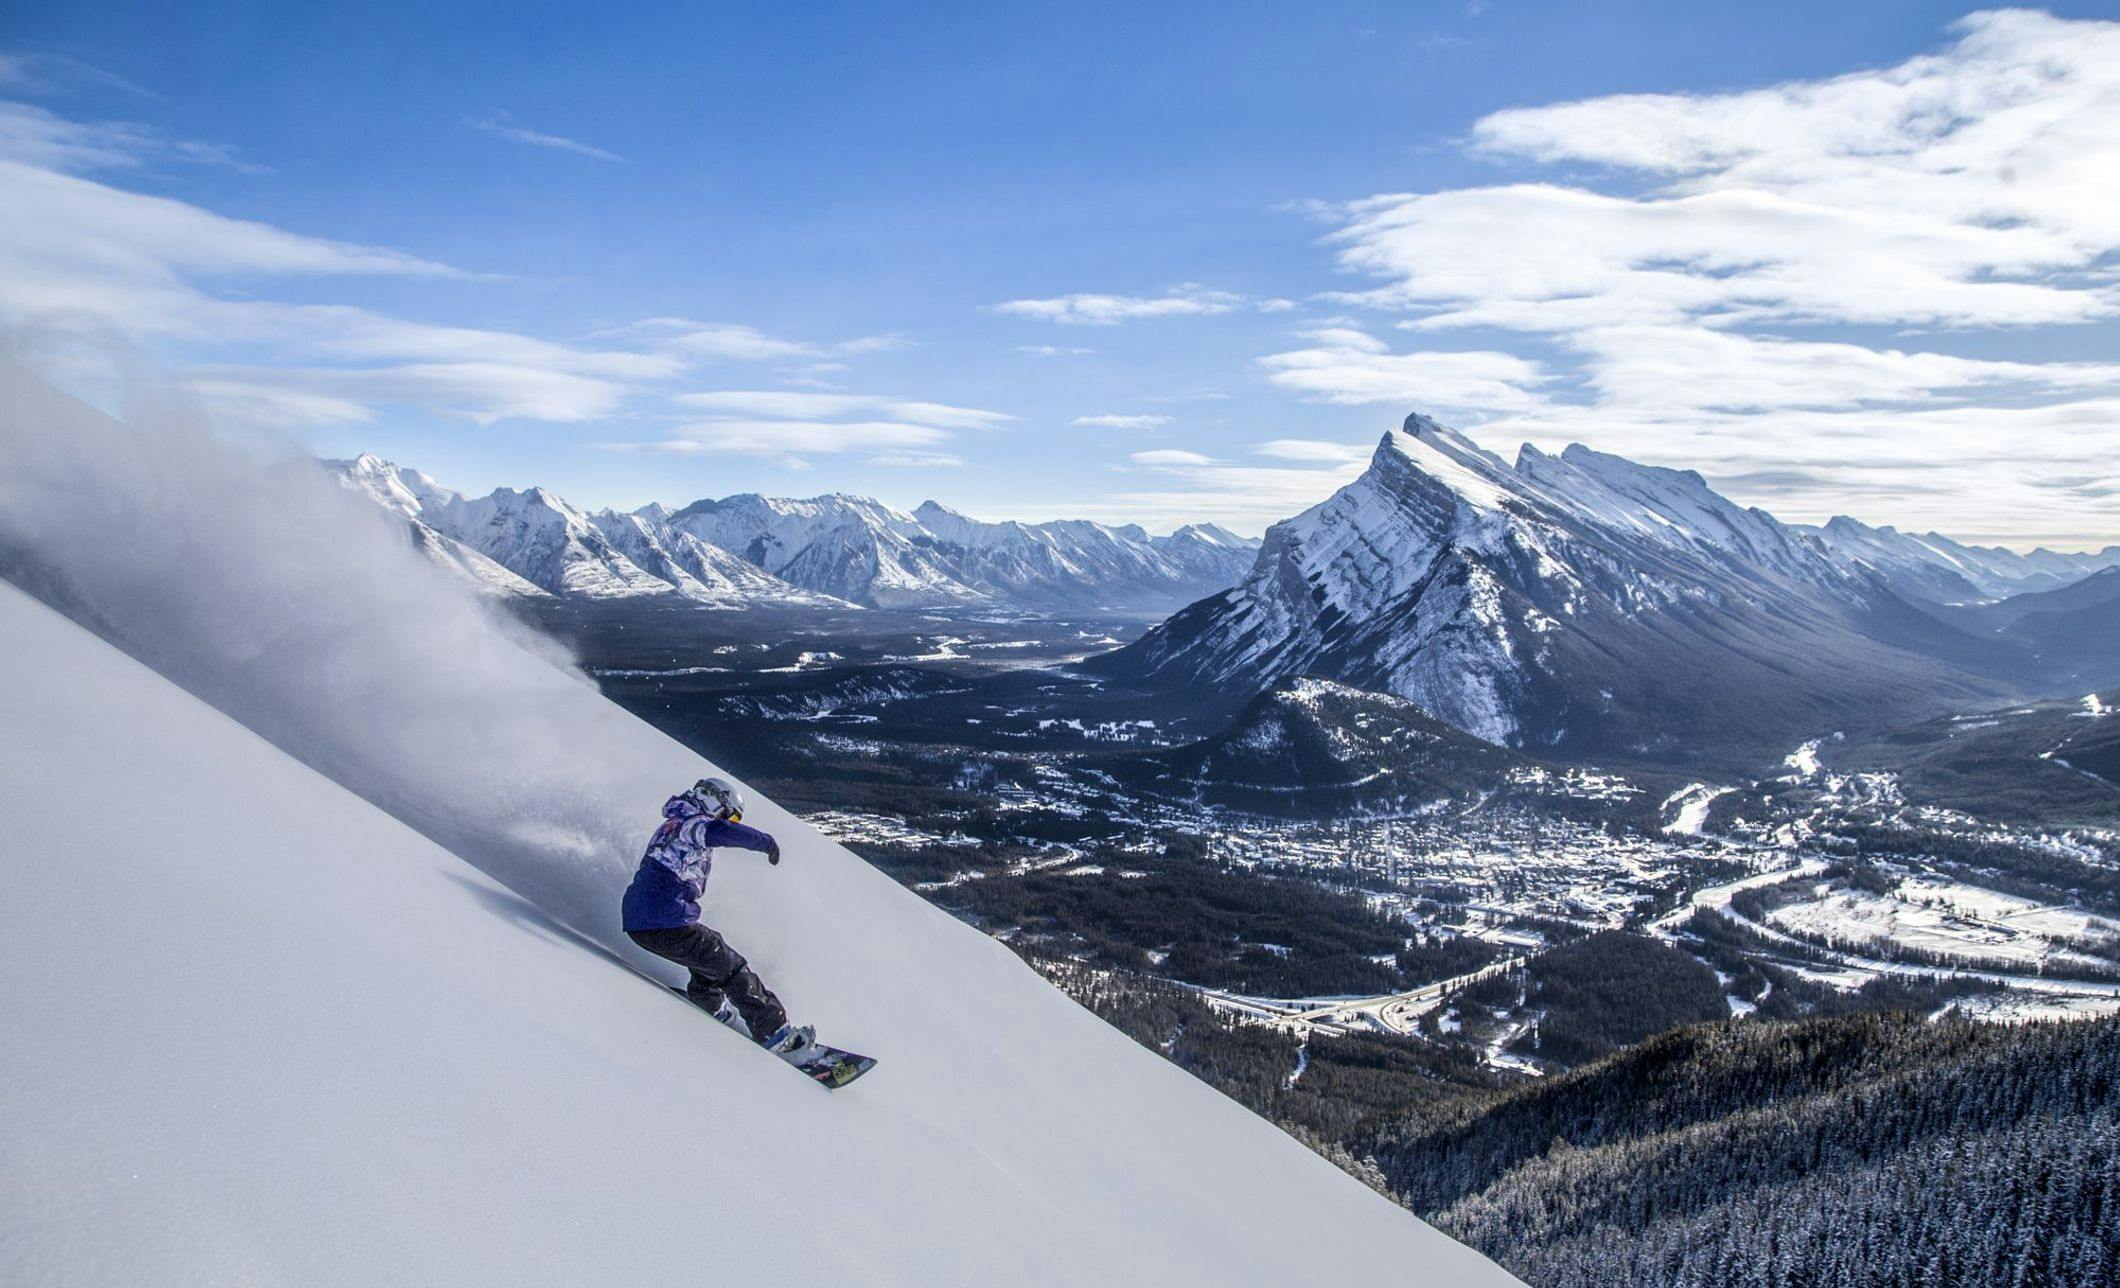 Snowboarder heading down a mountain with a snow covered town of Banff below and snowy mountains surrounding